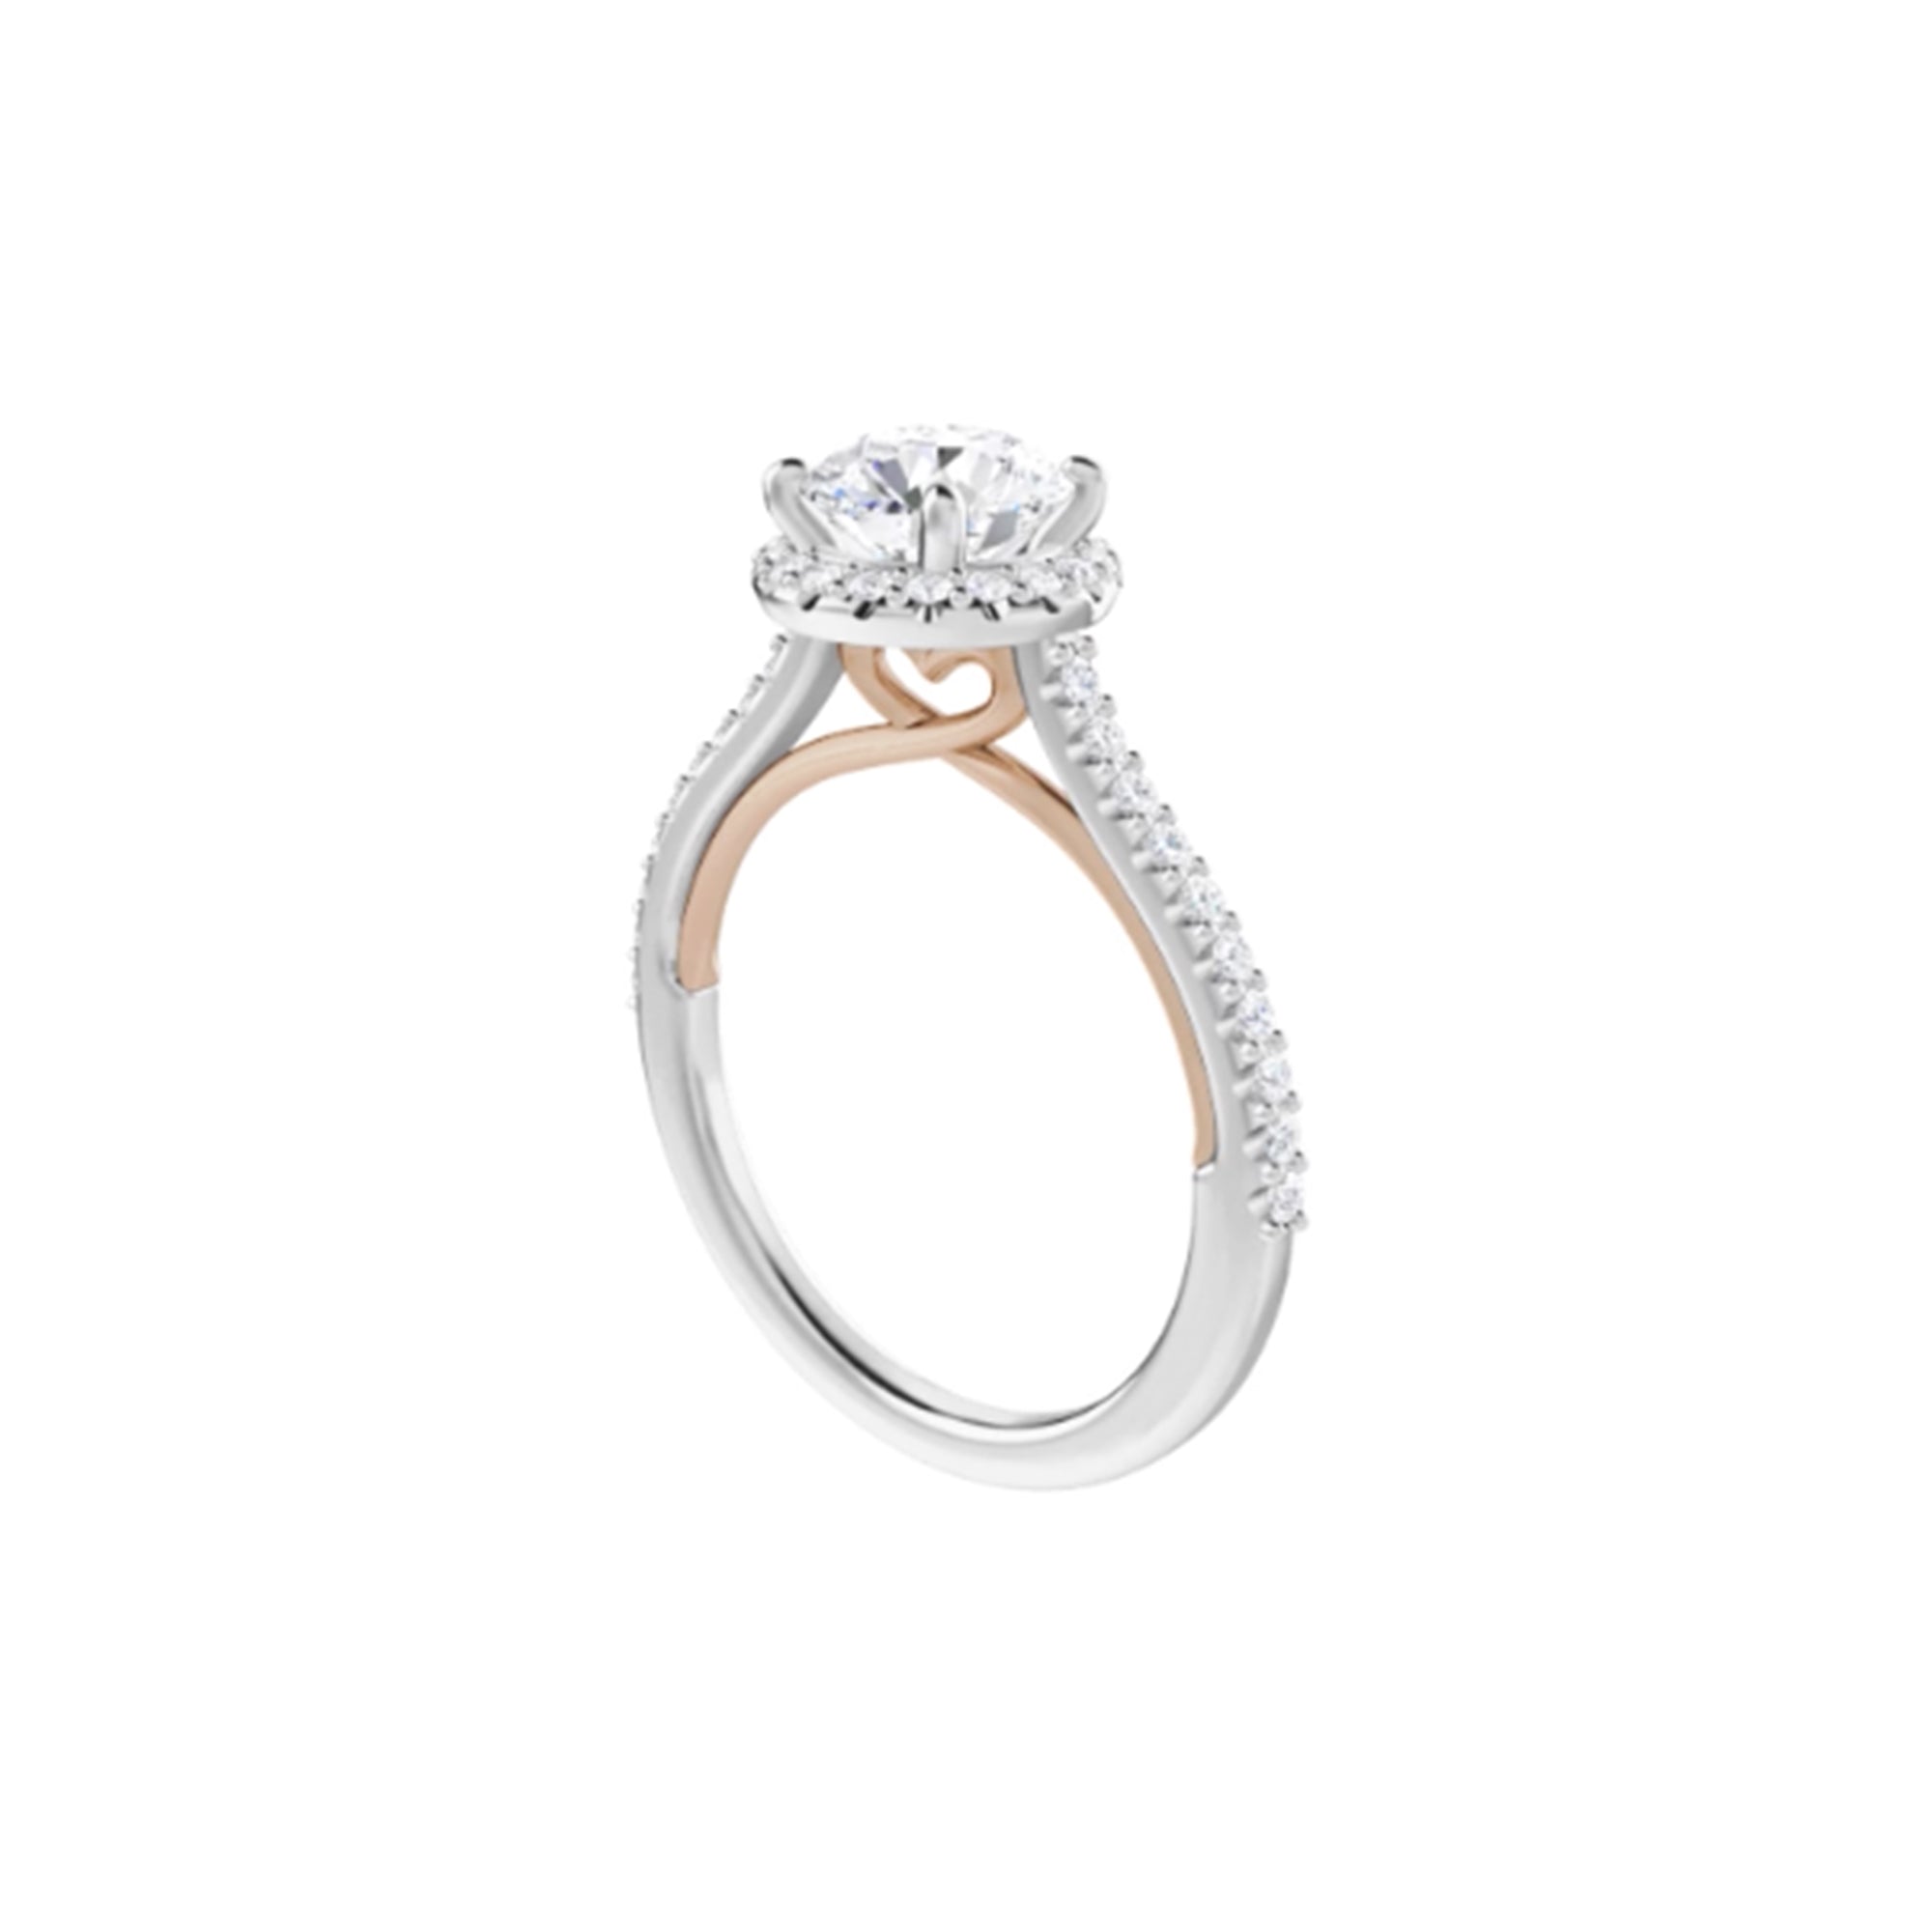 Two-Tone White and Rose Gold Diamond Halo Engagement Ring - Talisman Collection Fine Jewelers